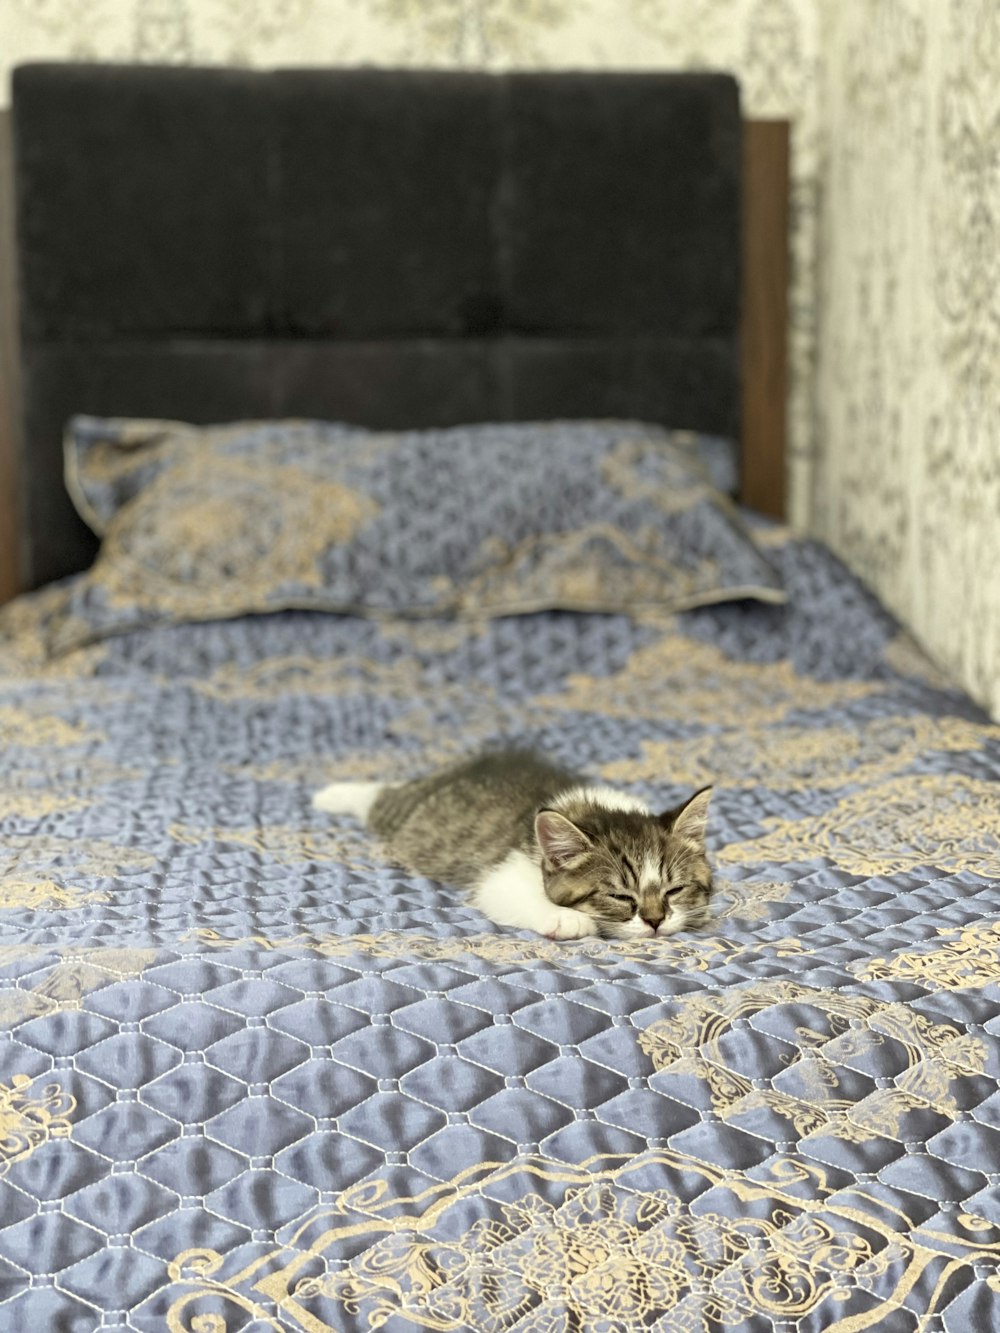 brown tabby cat lying on blue and white bed linen